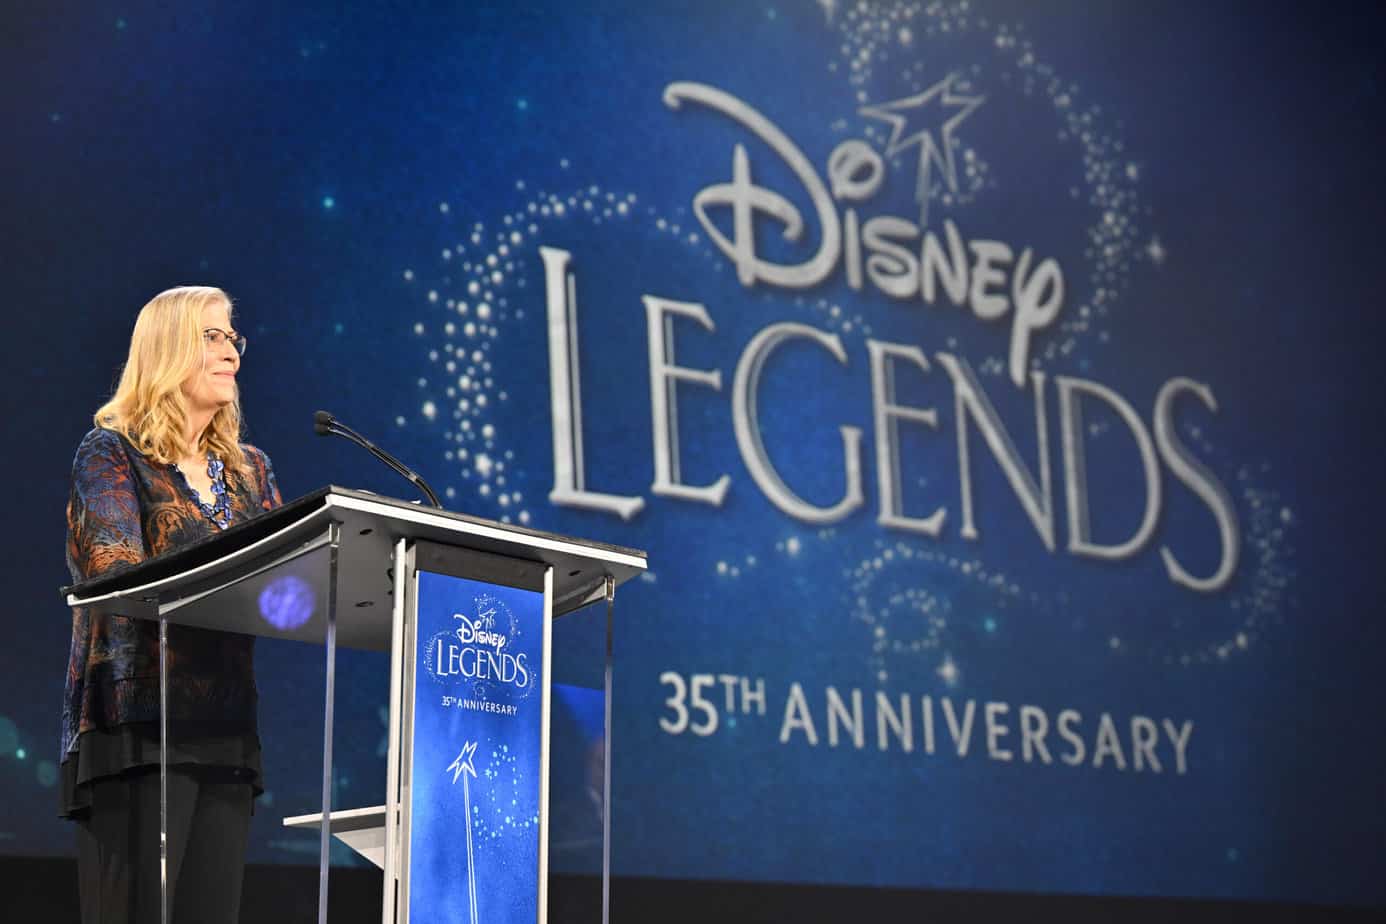 Debby Swenson speaks at a podium with the Disney Legends 35th Anniversary logo on a screen behind her. 